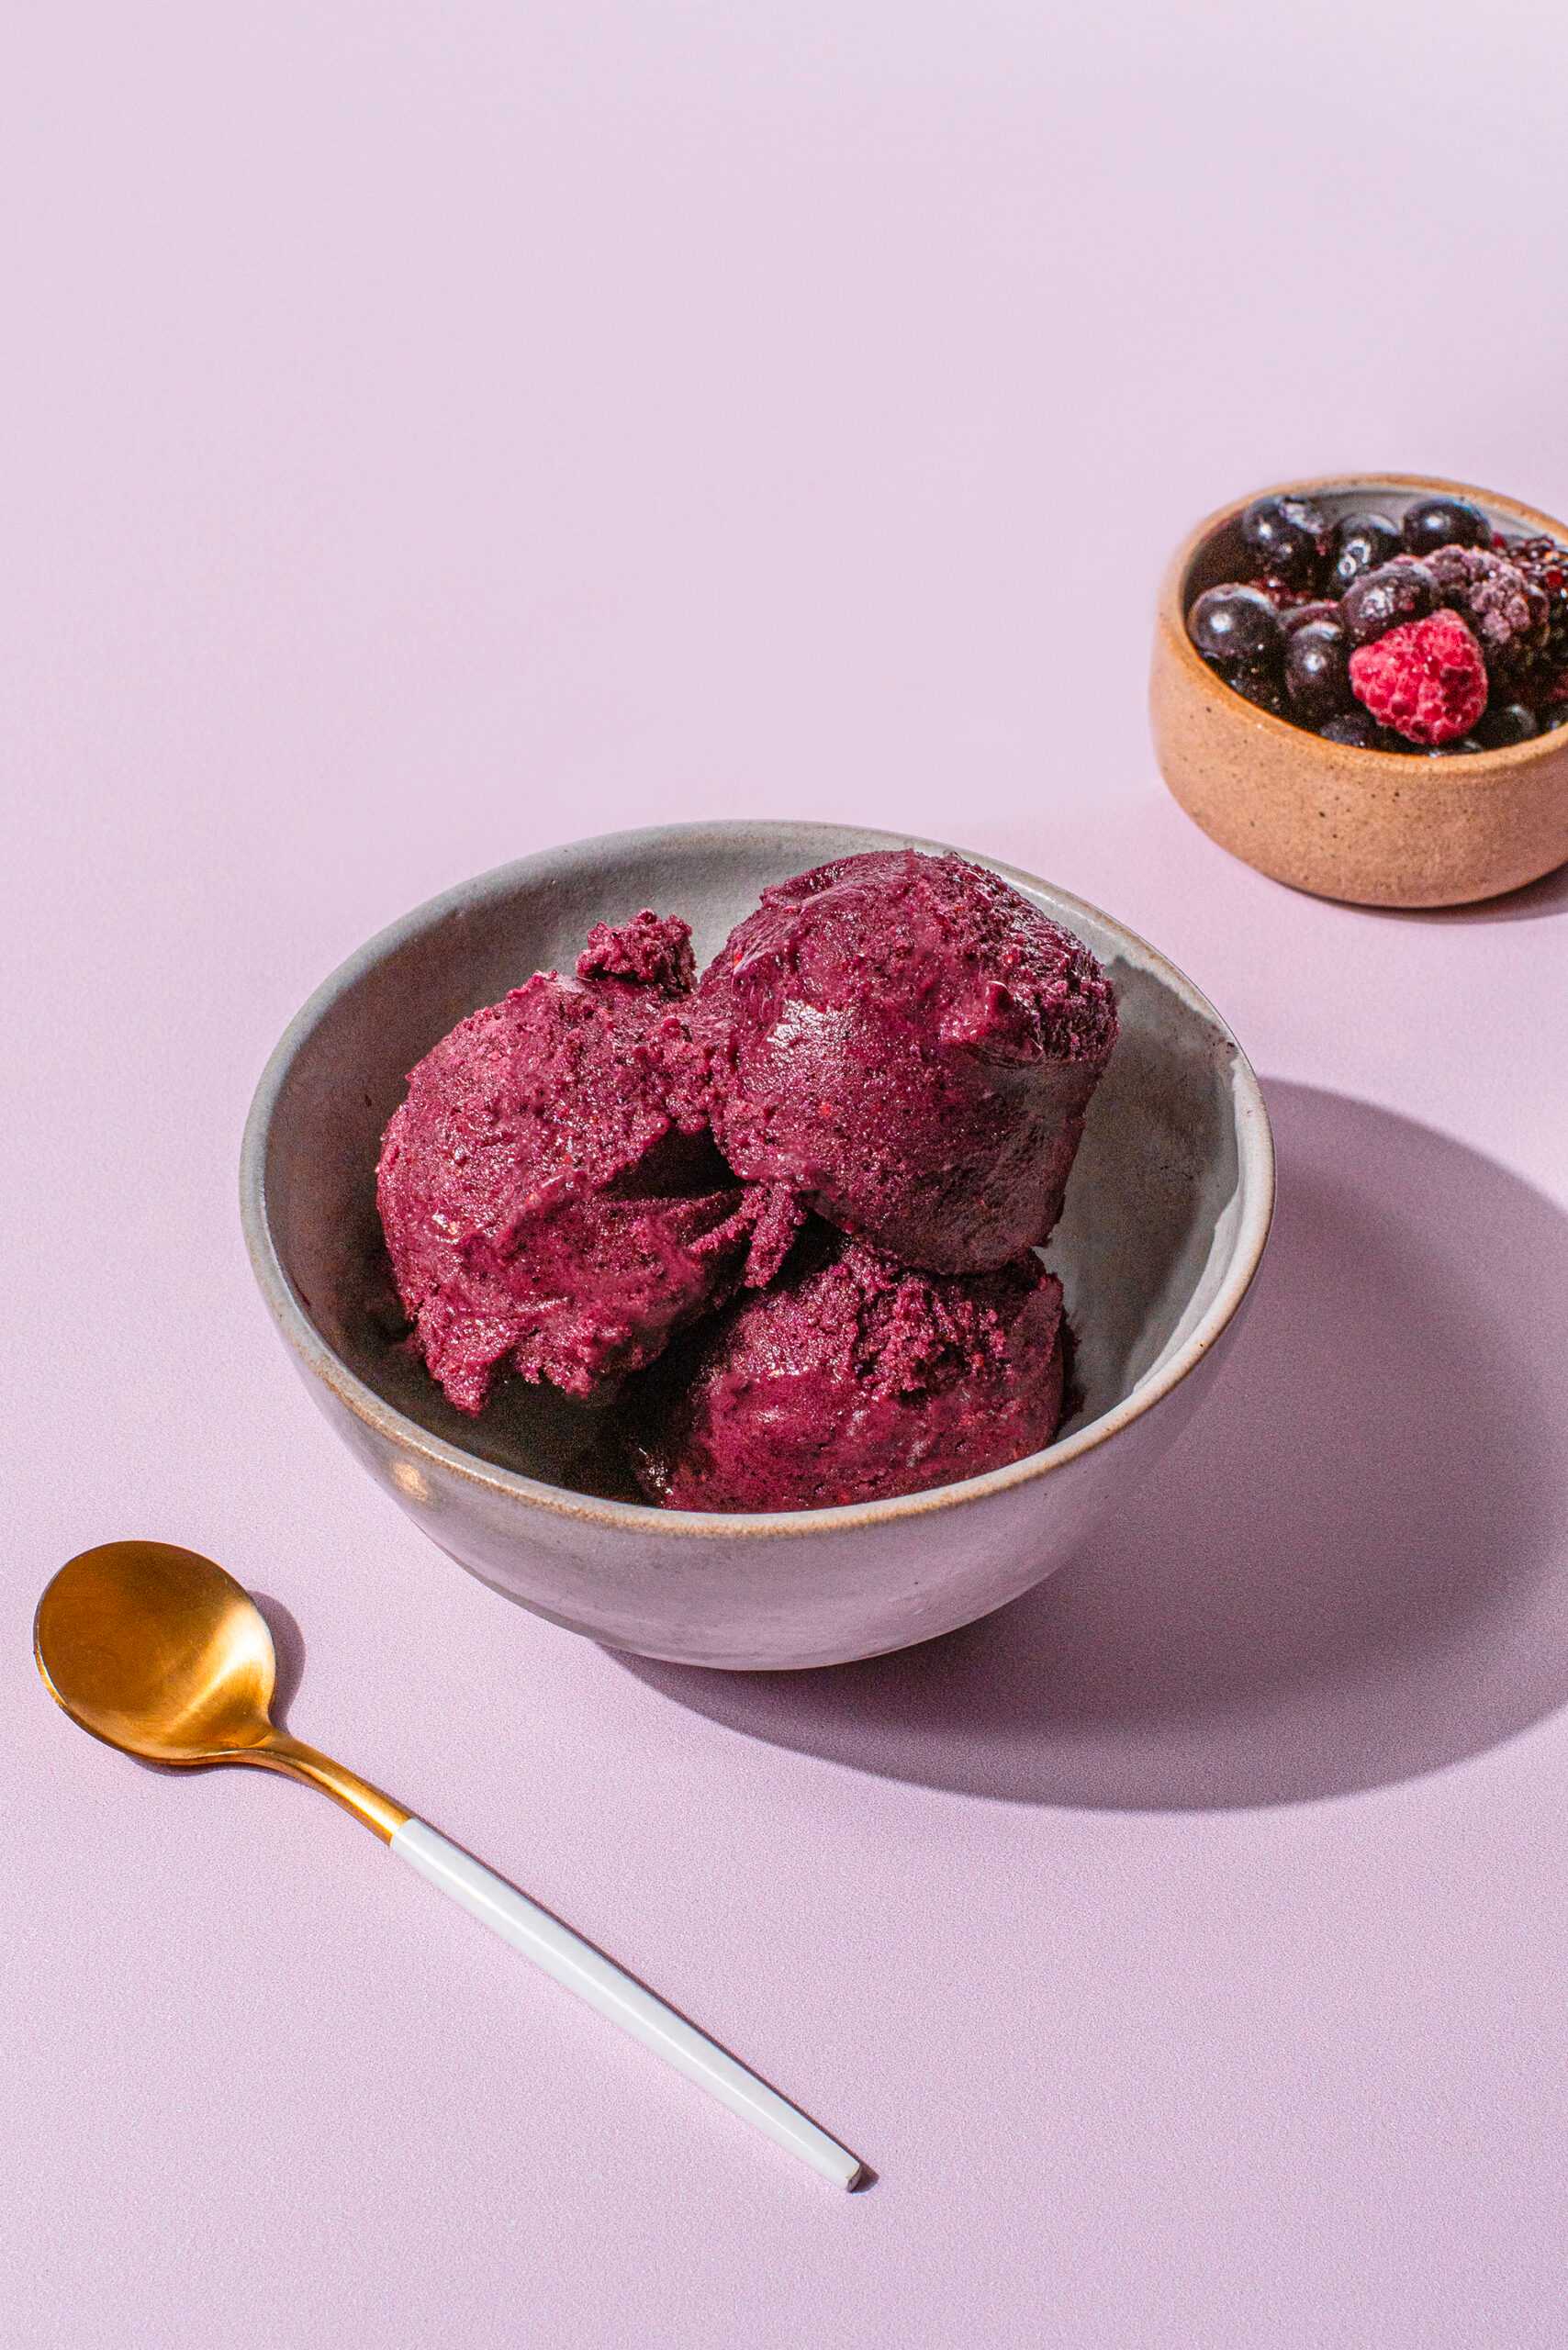 Mixed Berry Ice Cream sits in a bowl at the center of the image to show the finished product of this recipe.